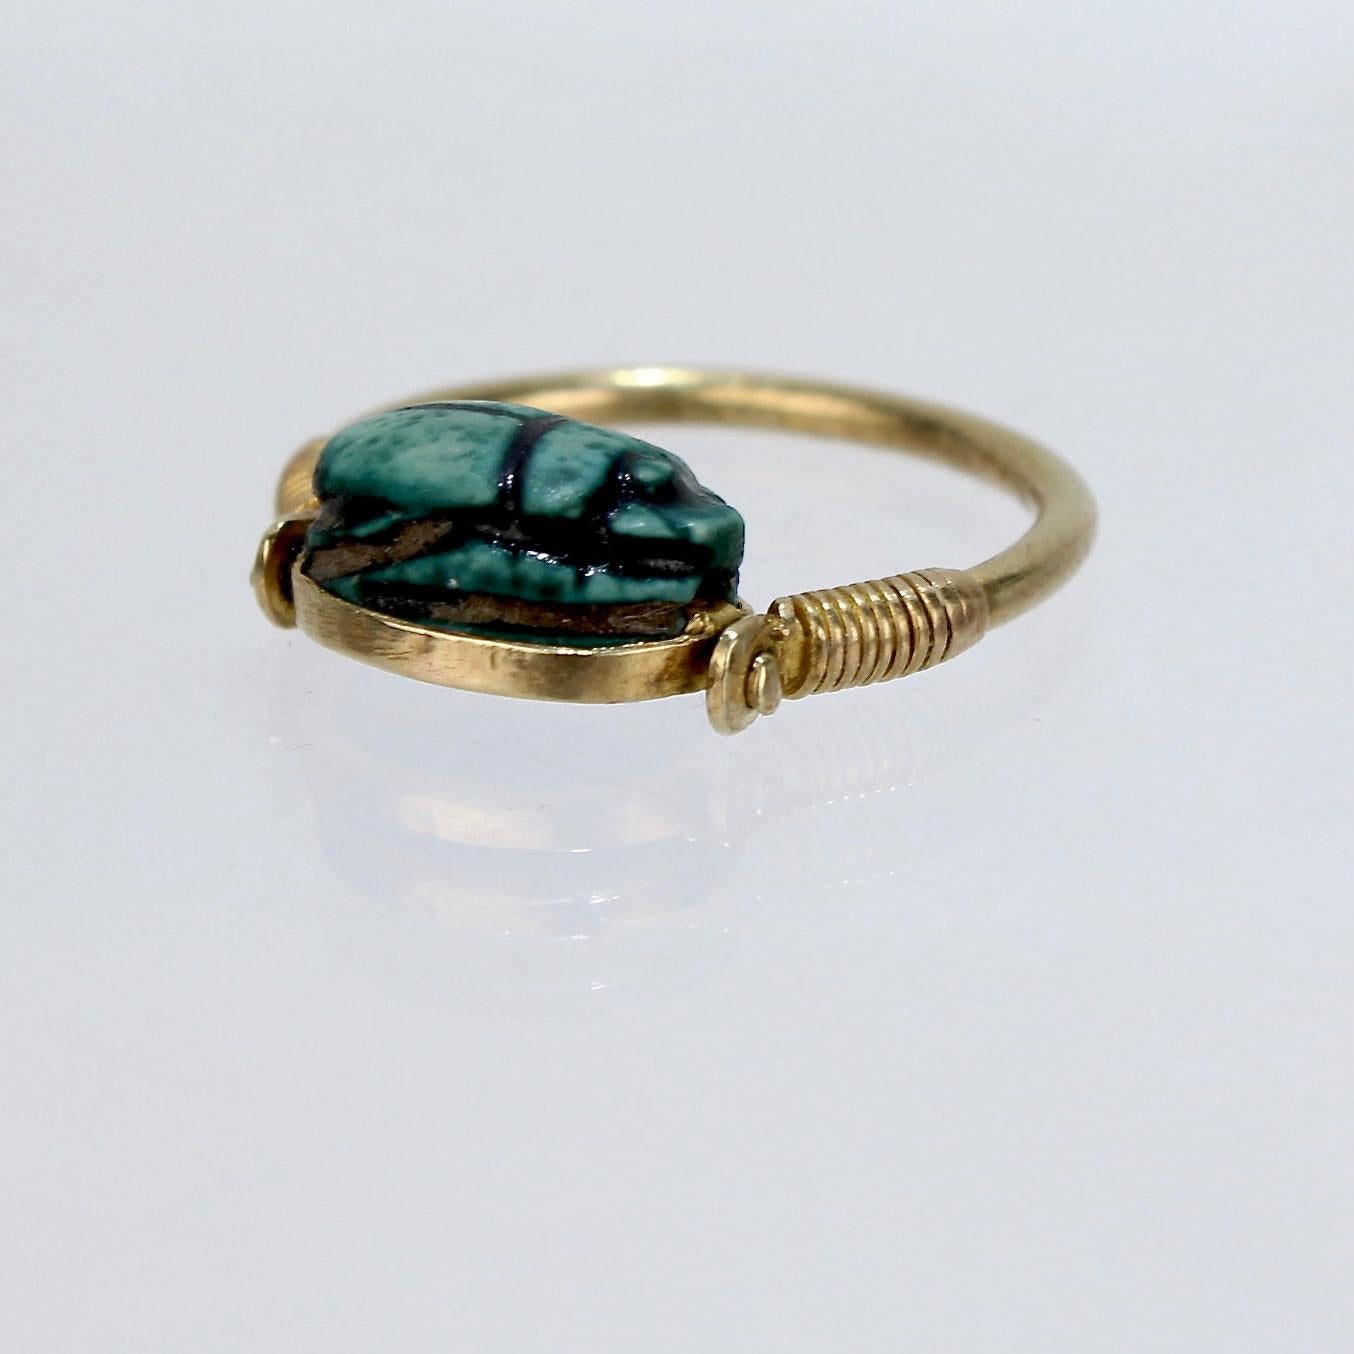 Egyptian Steatite Scarab and Gold Finger Ring with Mohasseb & Son Provenance 1